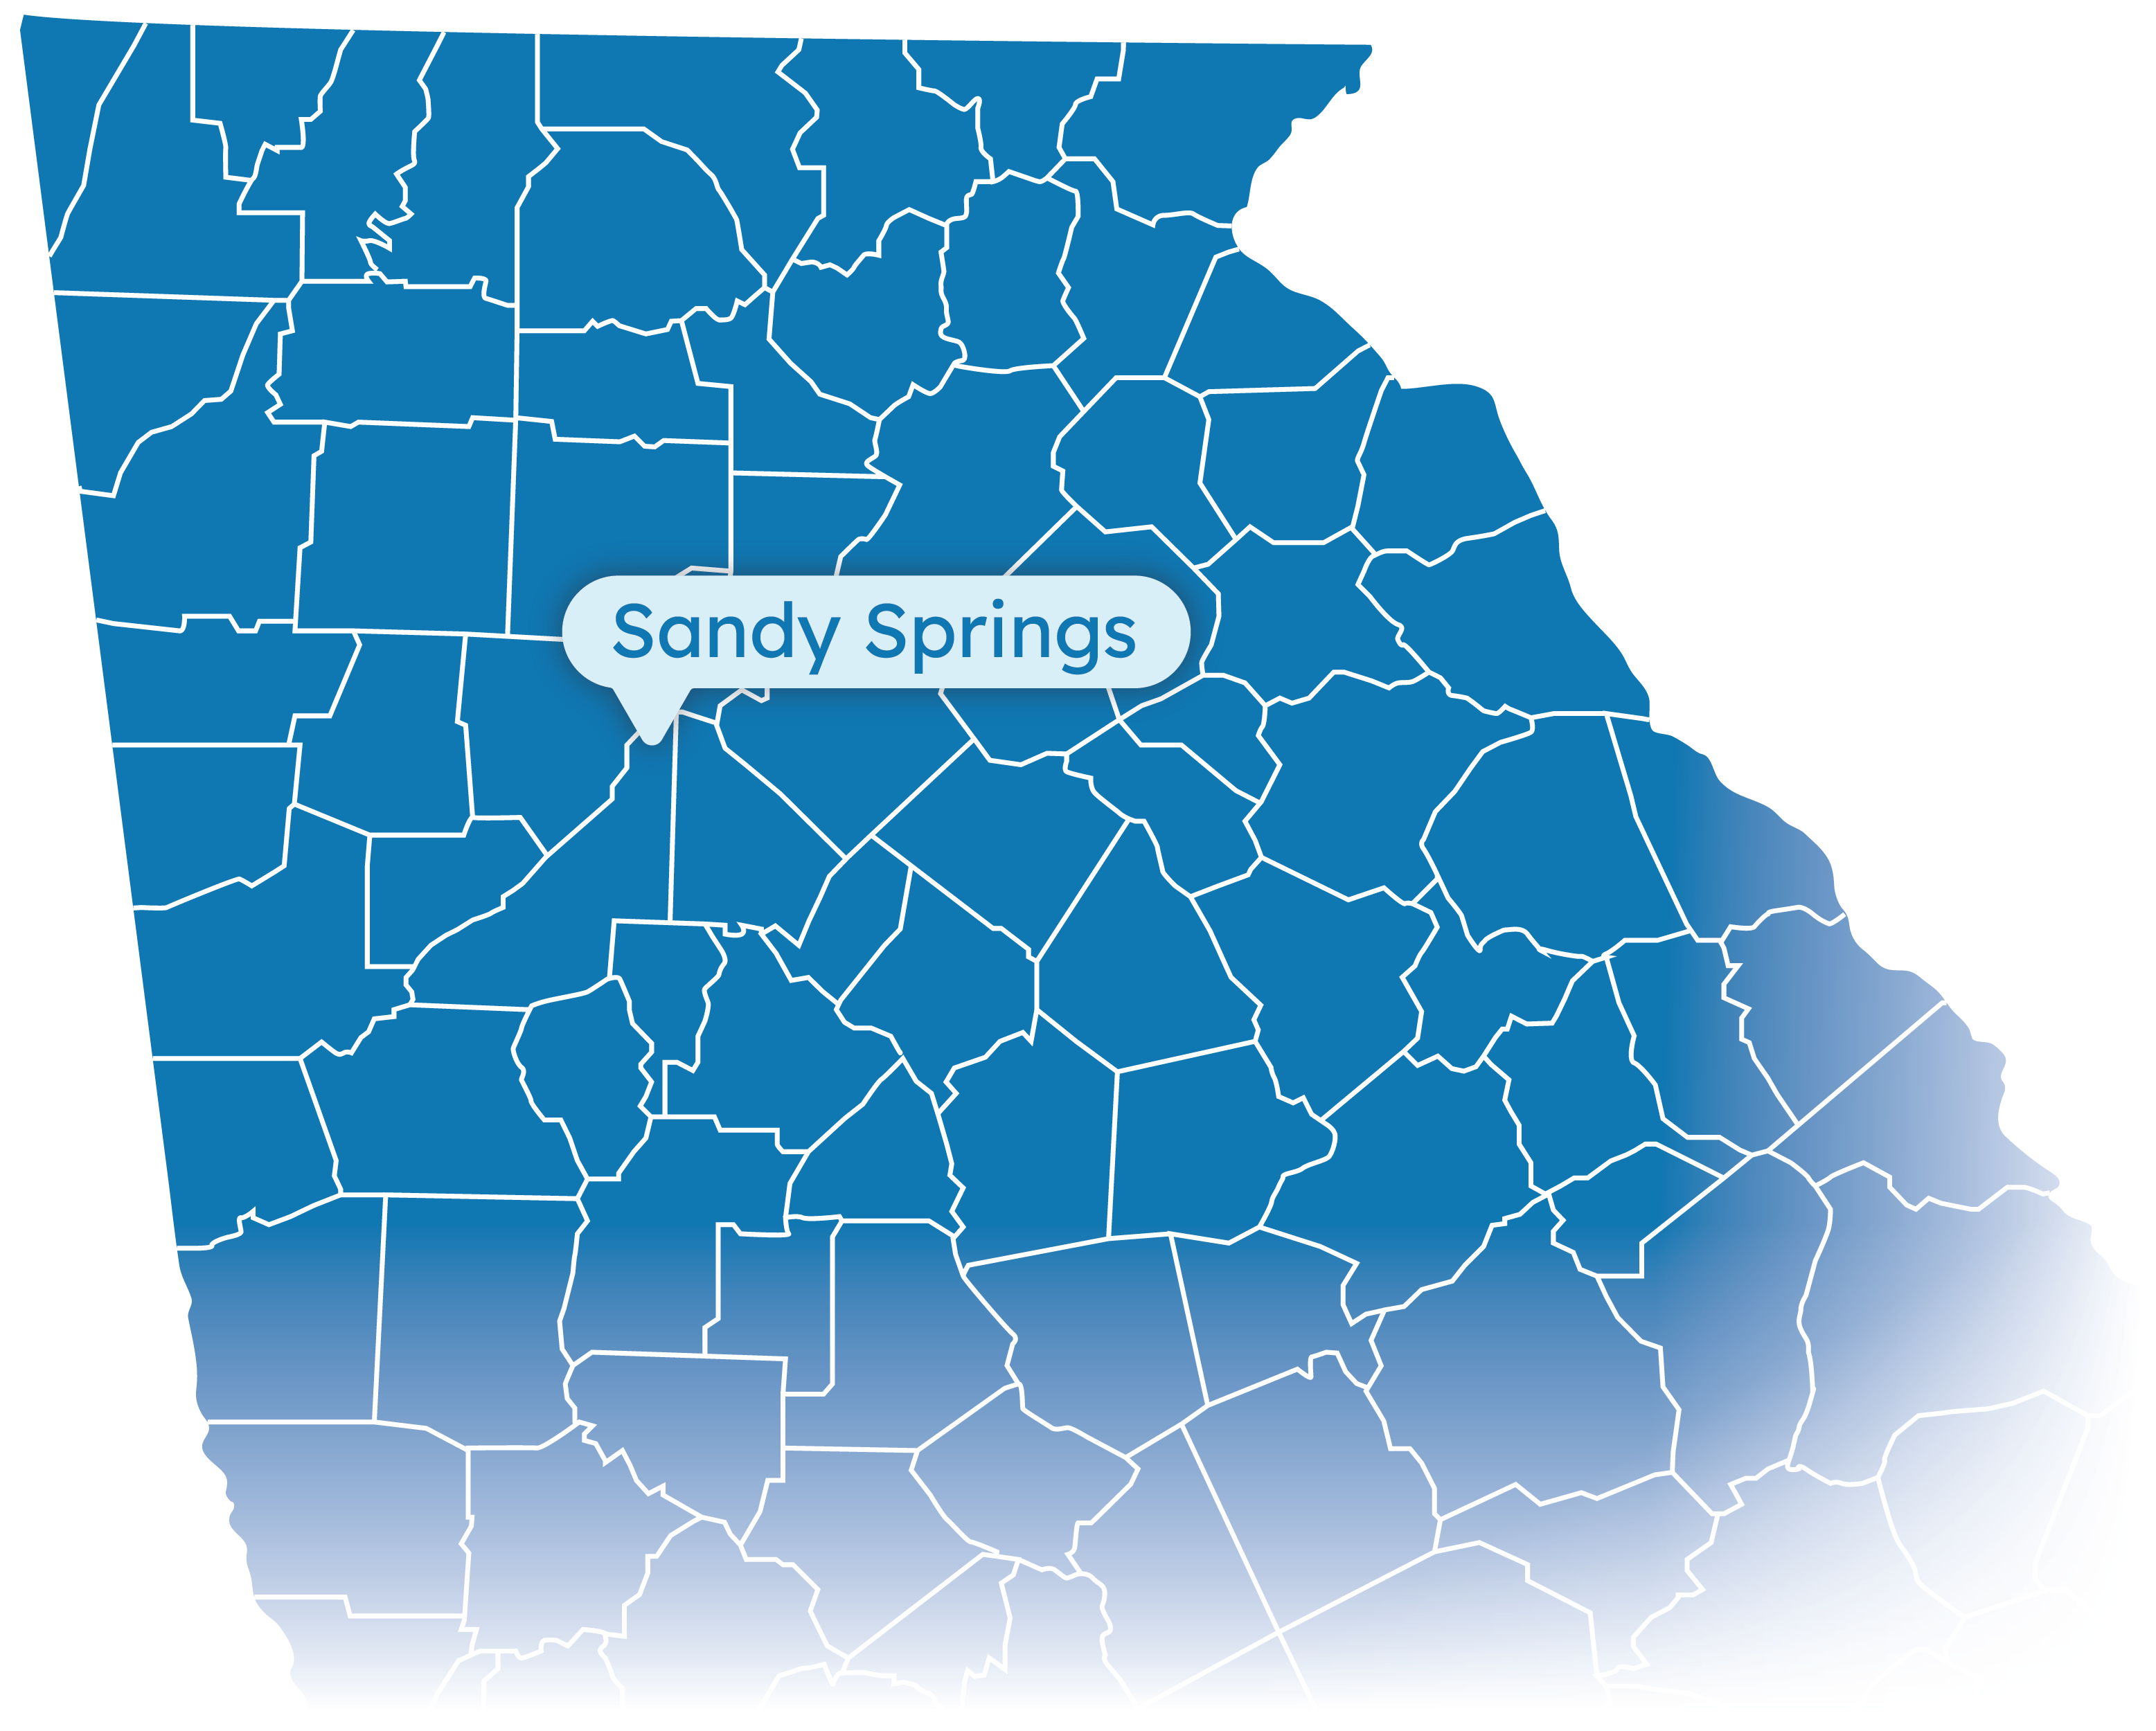 Map of Georgia with Sandy Springs highlighted